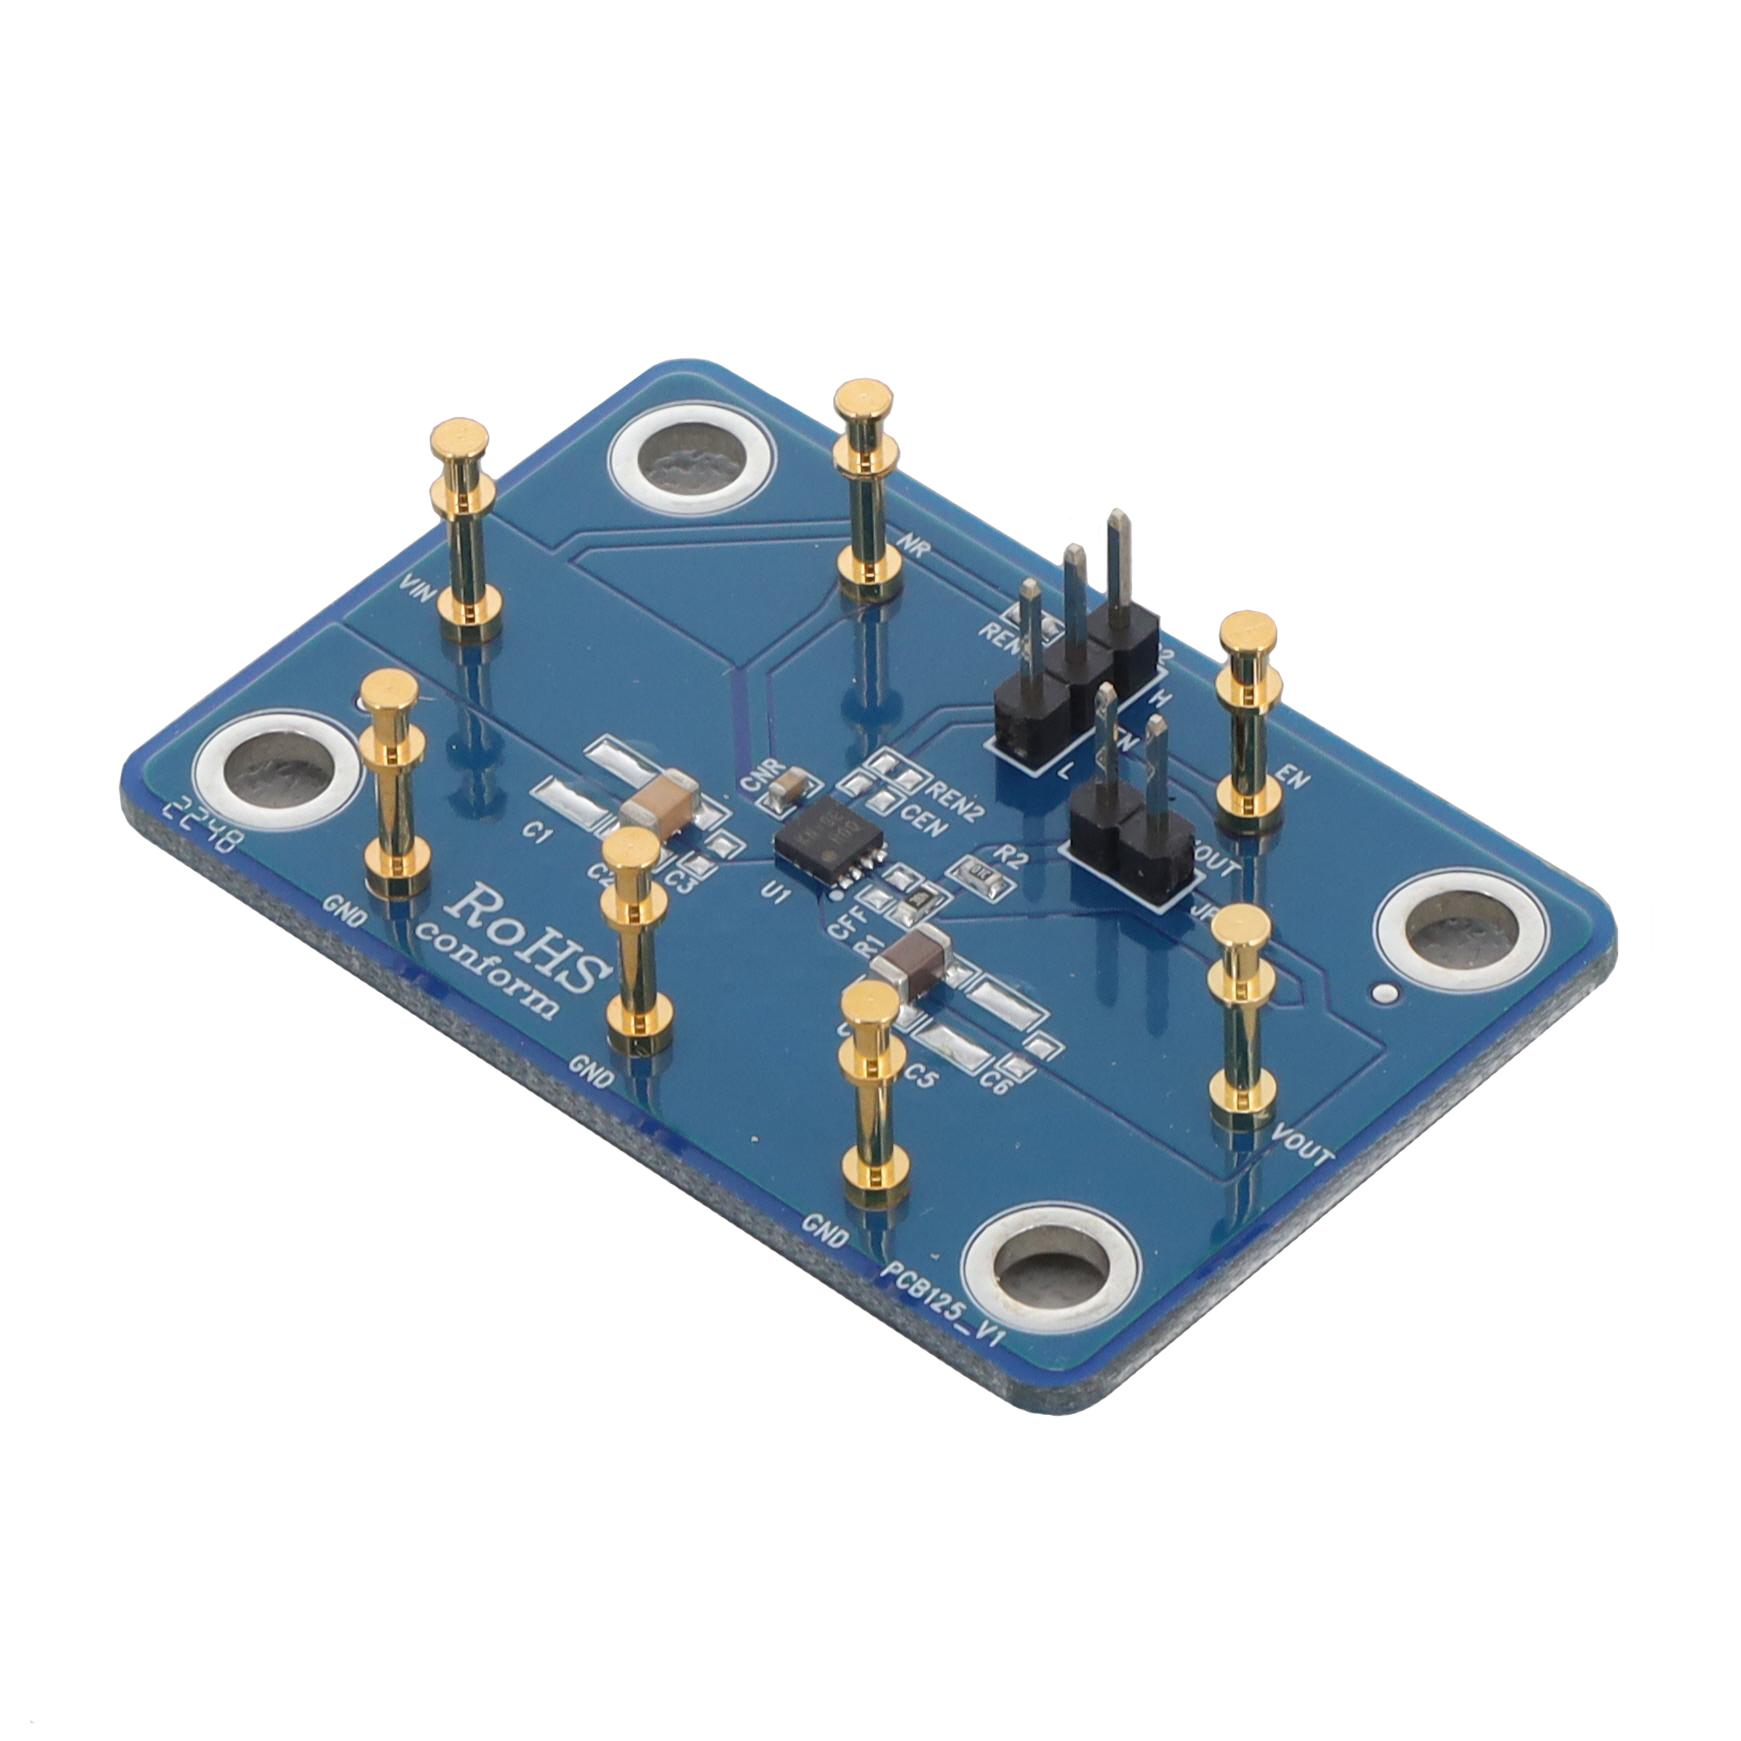 【EVB_RT2519GQV(2)】EVALUATION BOARD FOR RT2519GQV(2